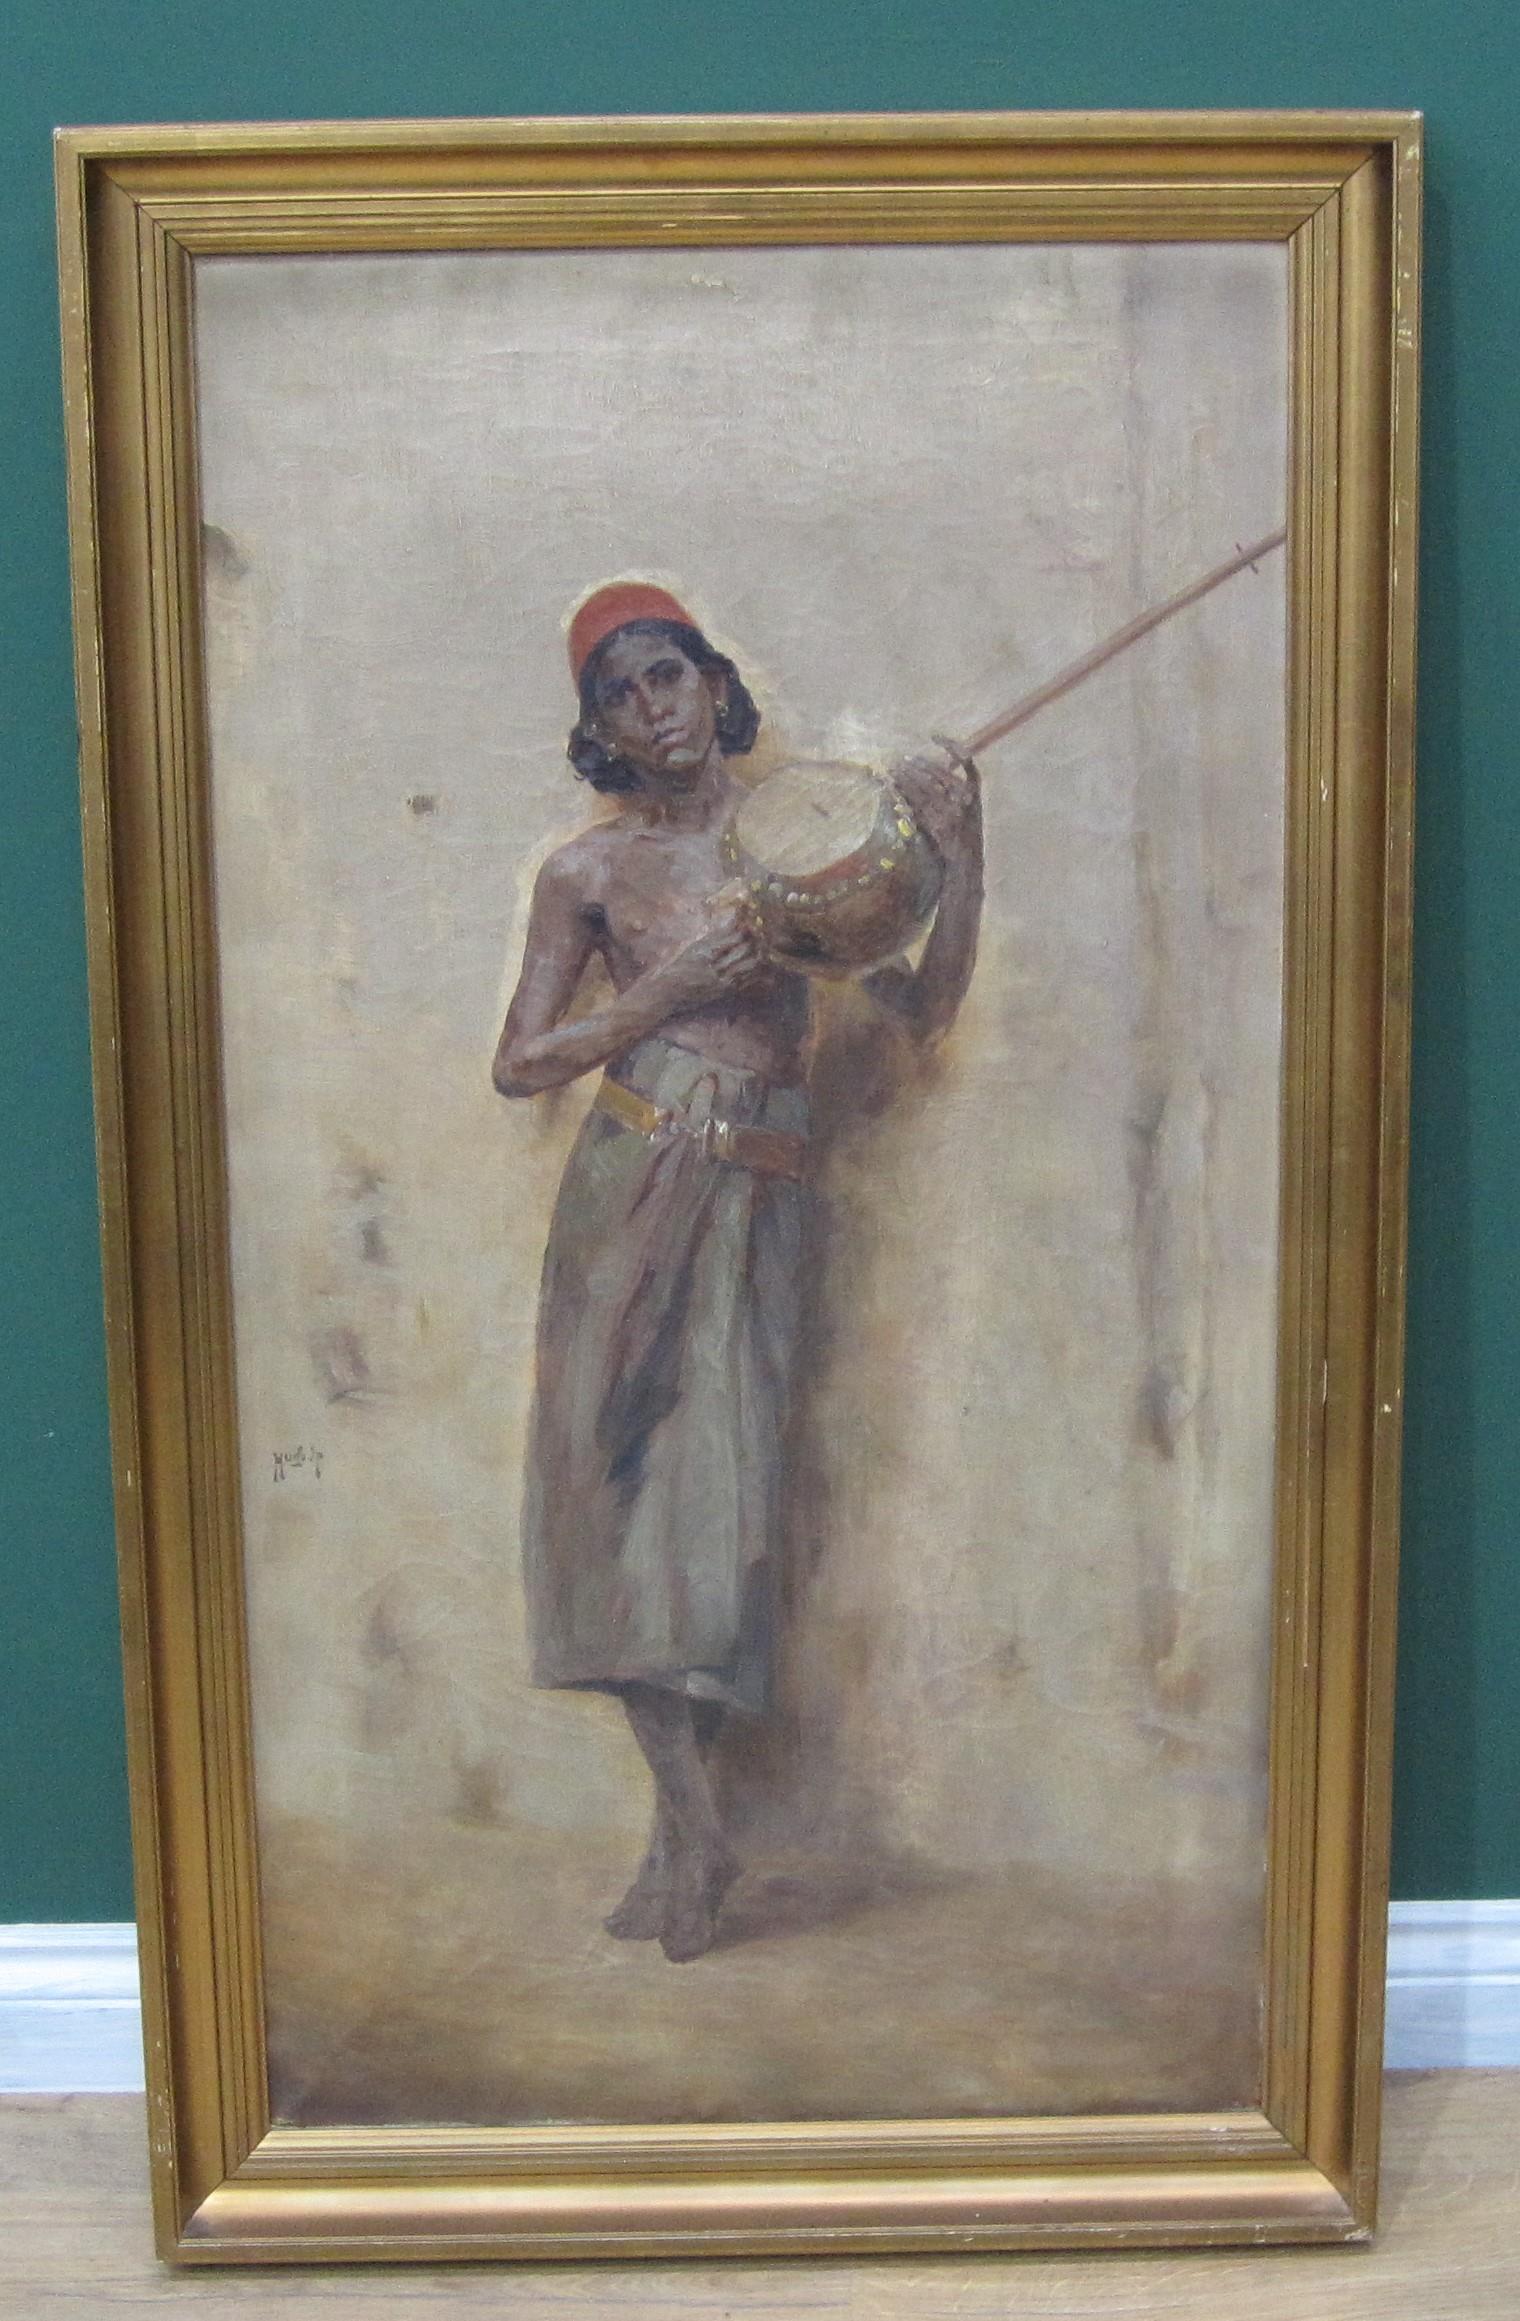 HUGO VILFRED PEDERSEN (1870-1959). A figure holding a box Sitar, indistinctly signed, oil on canvas, - Image 2 of 4